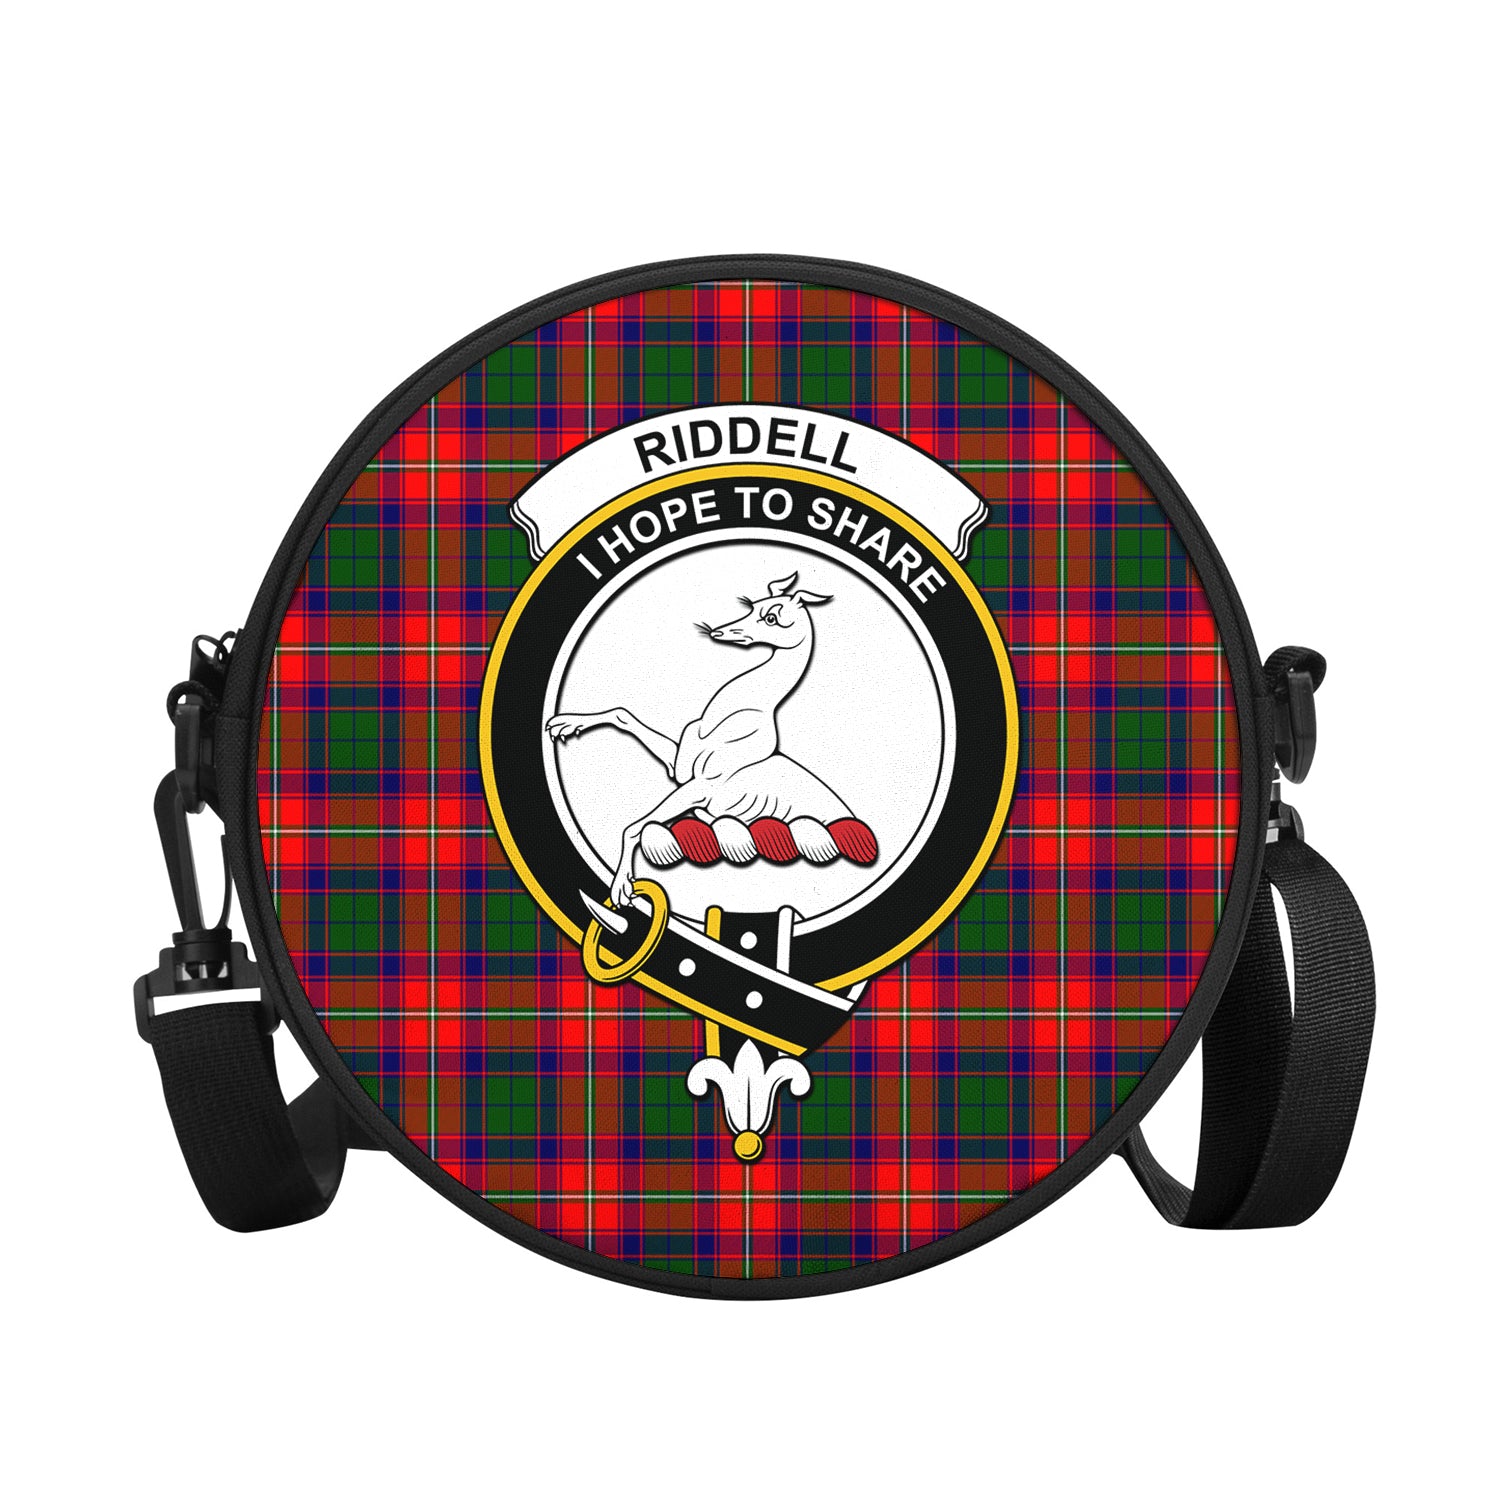 riddell-tartan-round-satchel-bags-with-family-crest